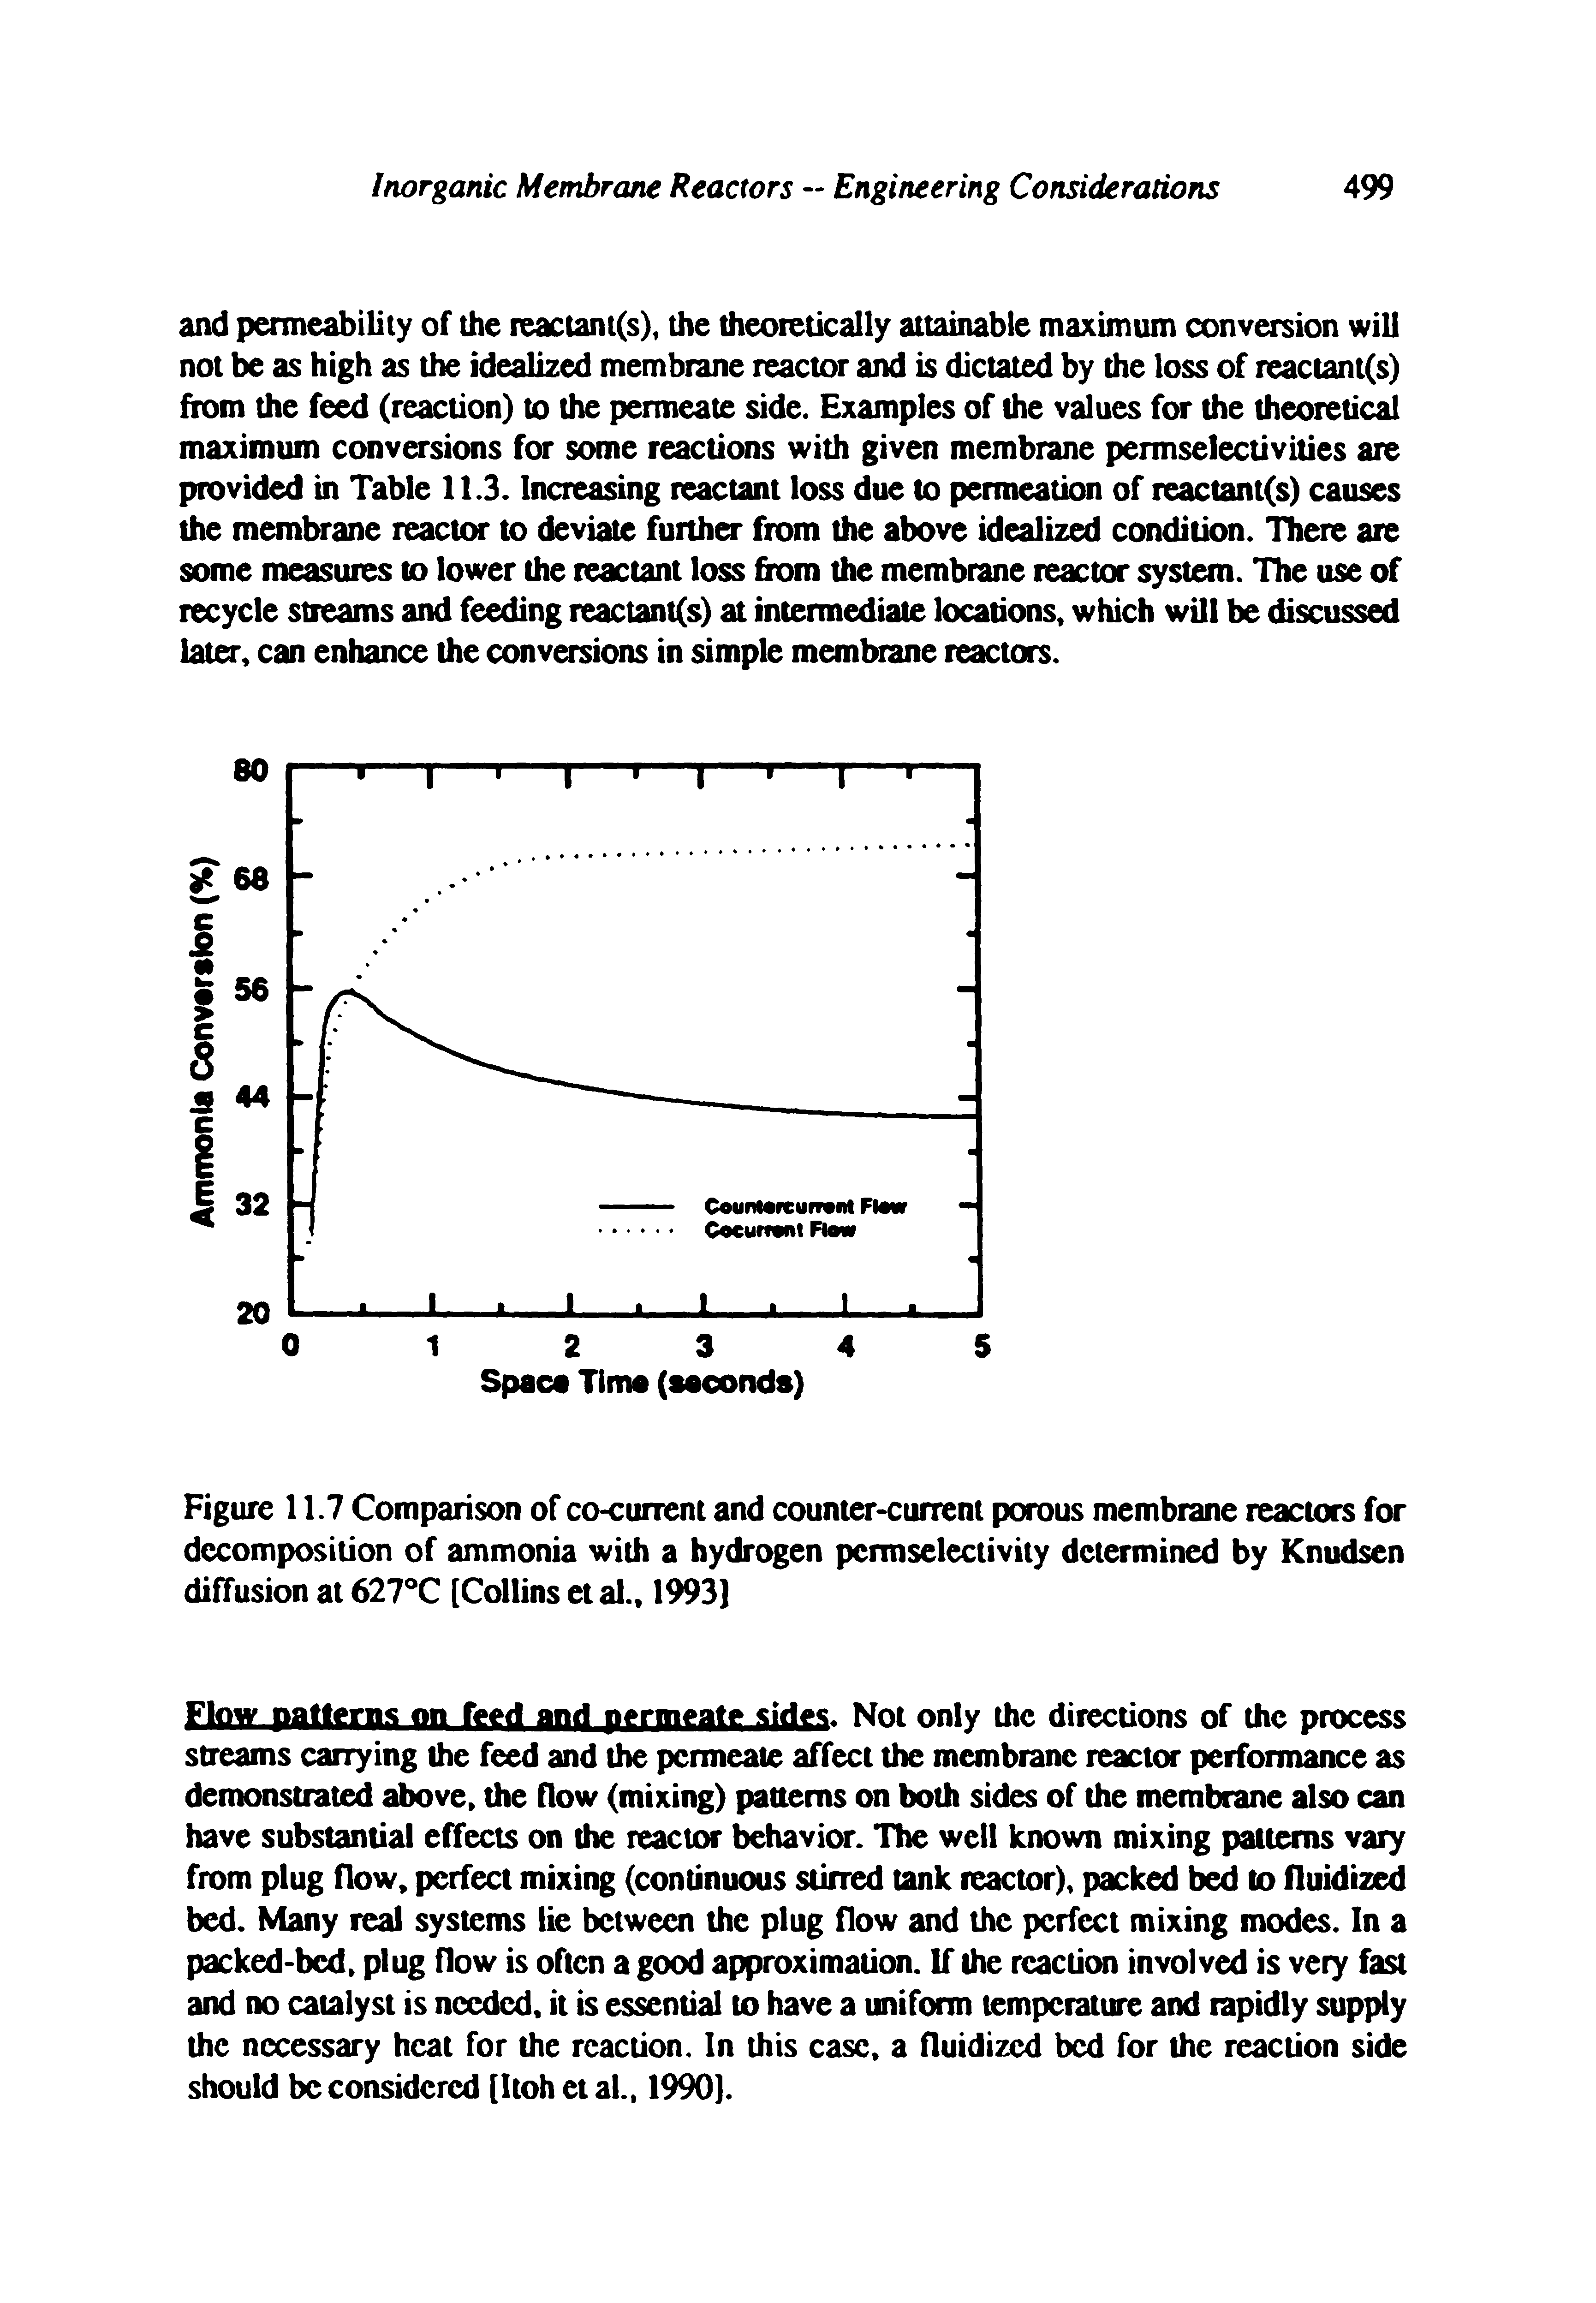 Figure 11.7 Comparison of co-current and counter-current porous membrane reactors for decomposition of ammonia with a hydrogen permselectivity determined by Knudsen diffusion at 627 C [Collins ct al., 19931...